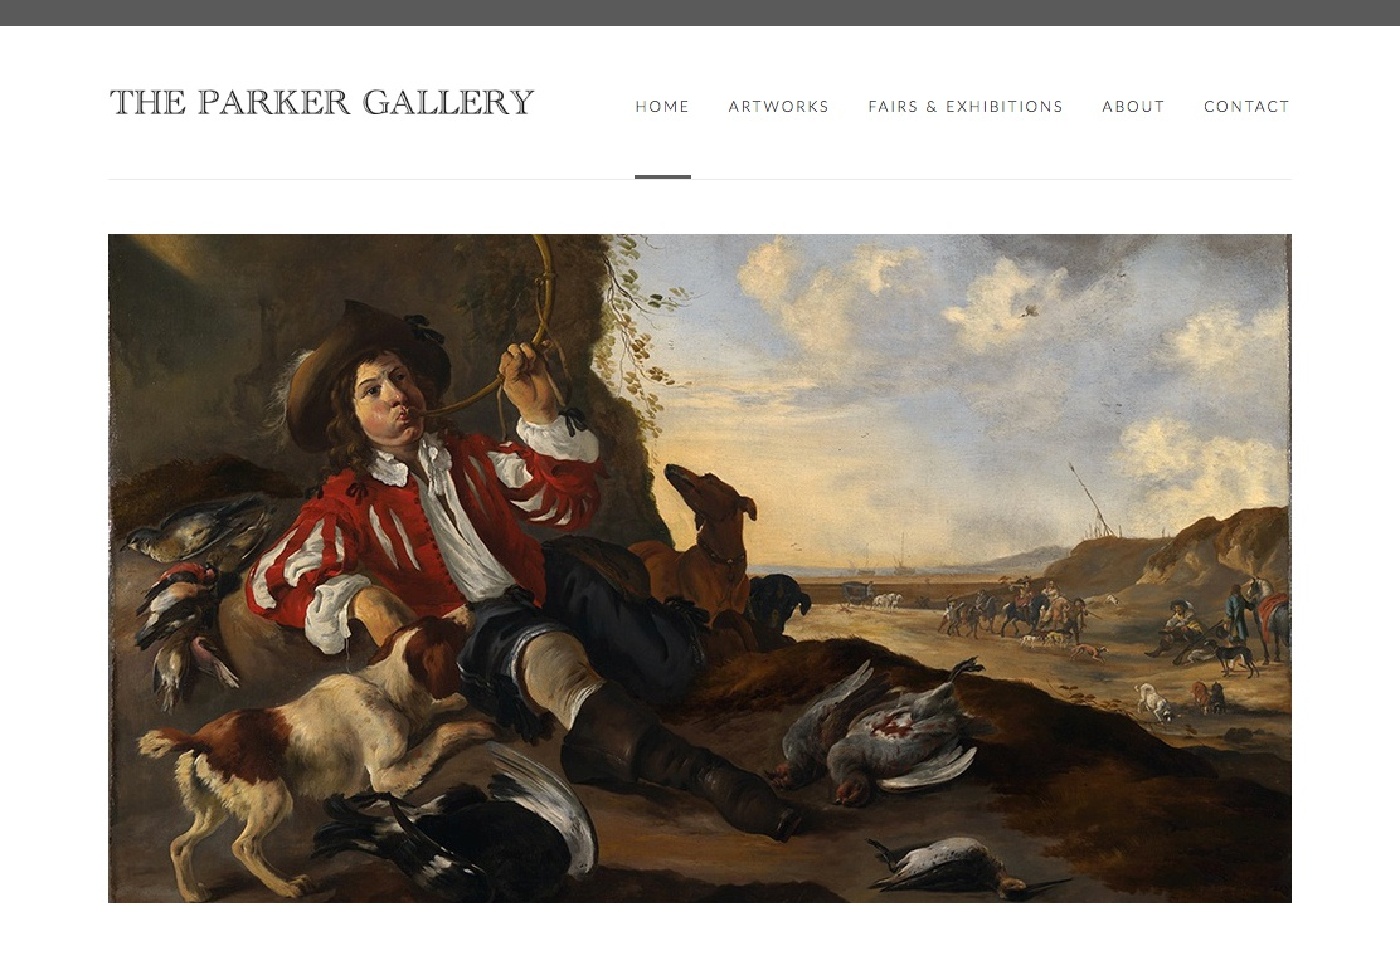 The Parker Gallery